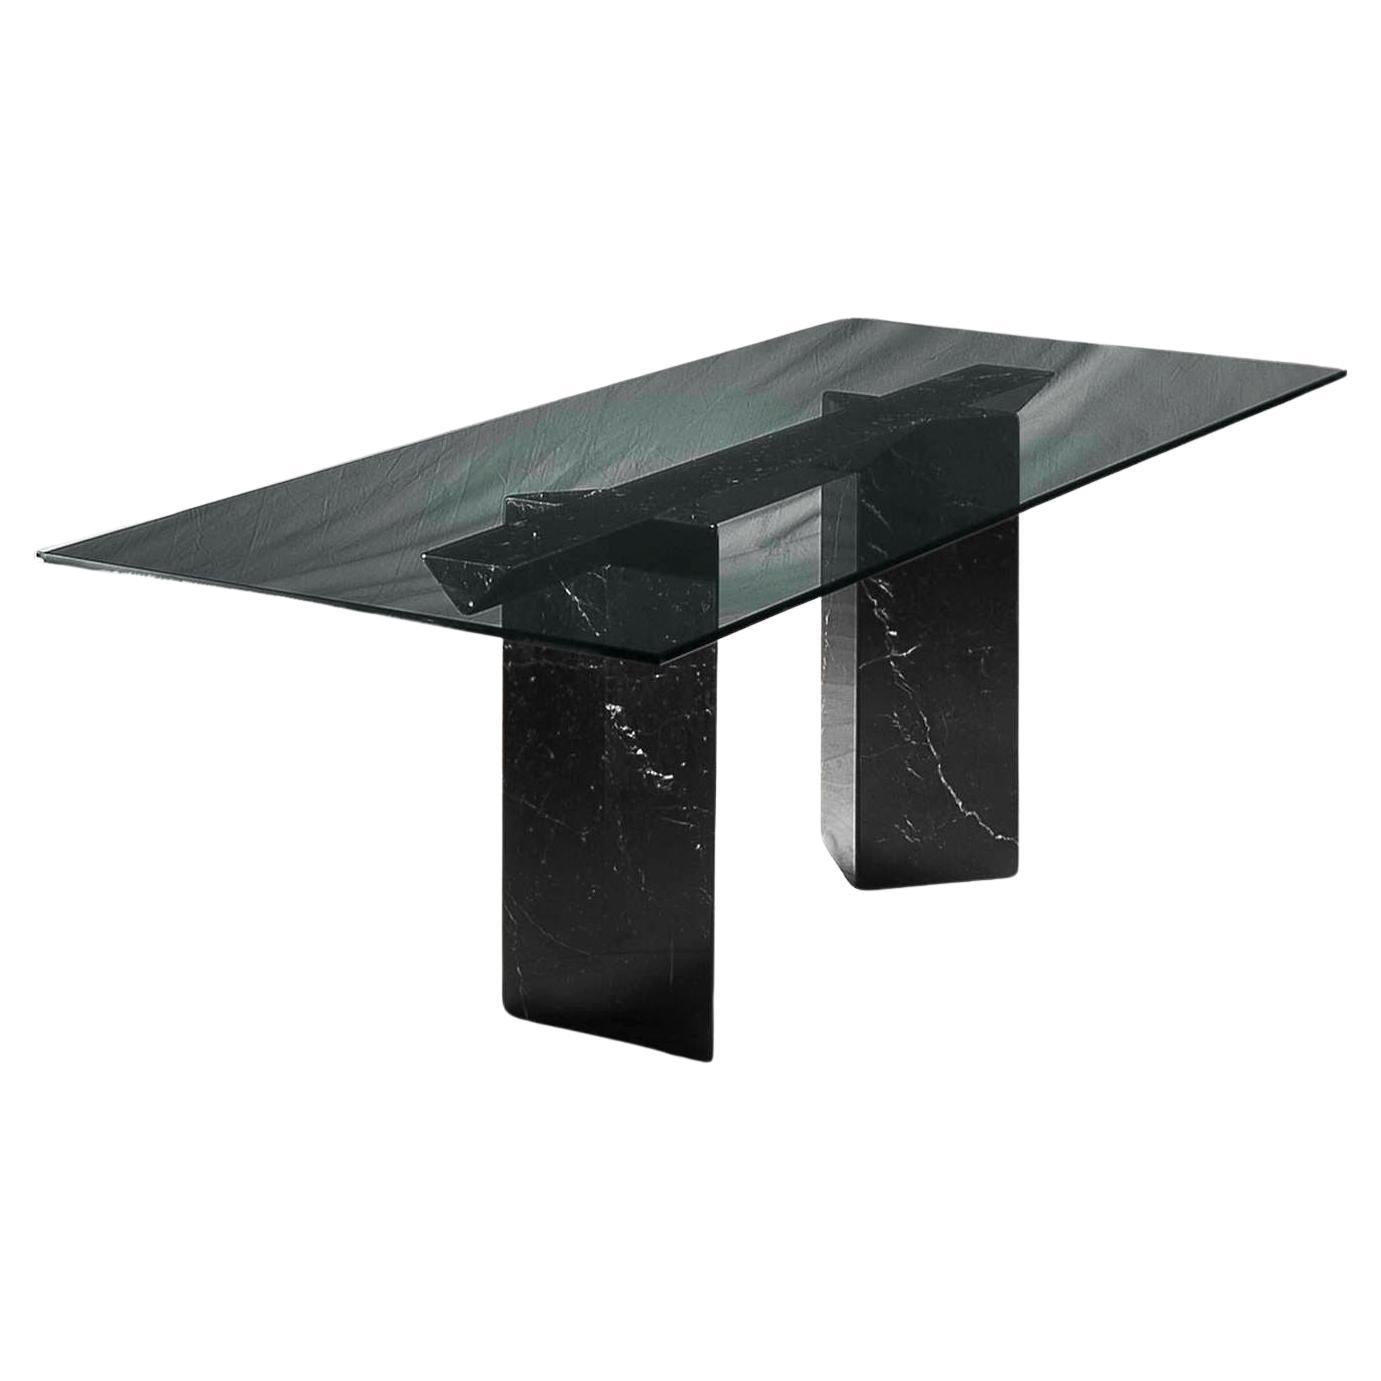 21st Century by G. Lazzotti "Fontia" Marble Dining Table in Bianco Carrara For Sale